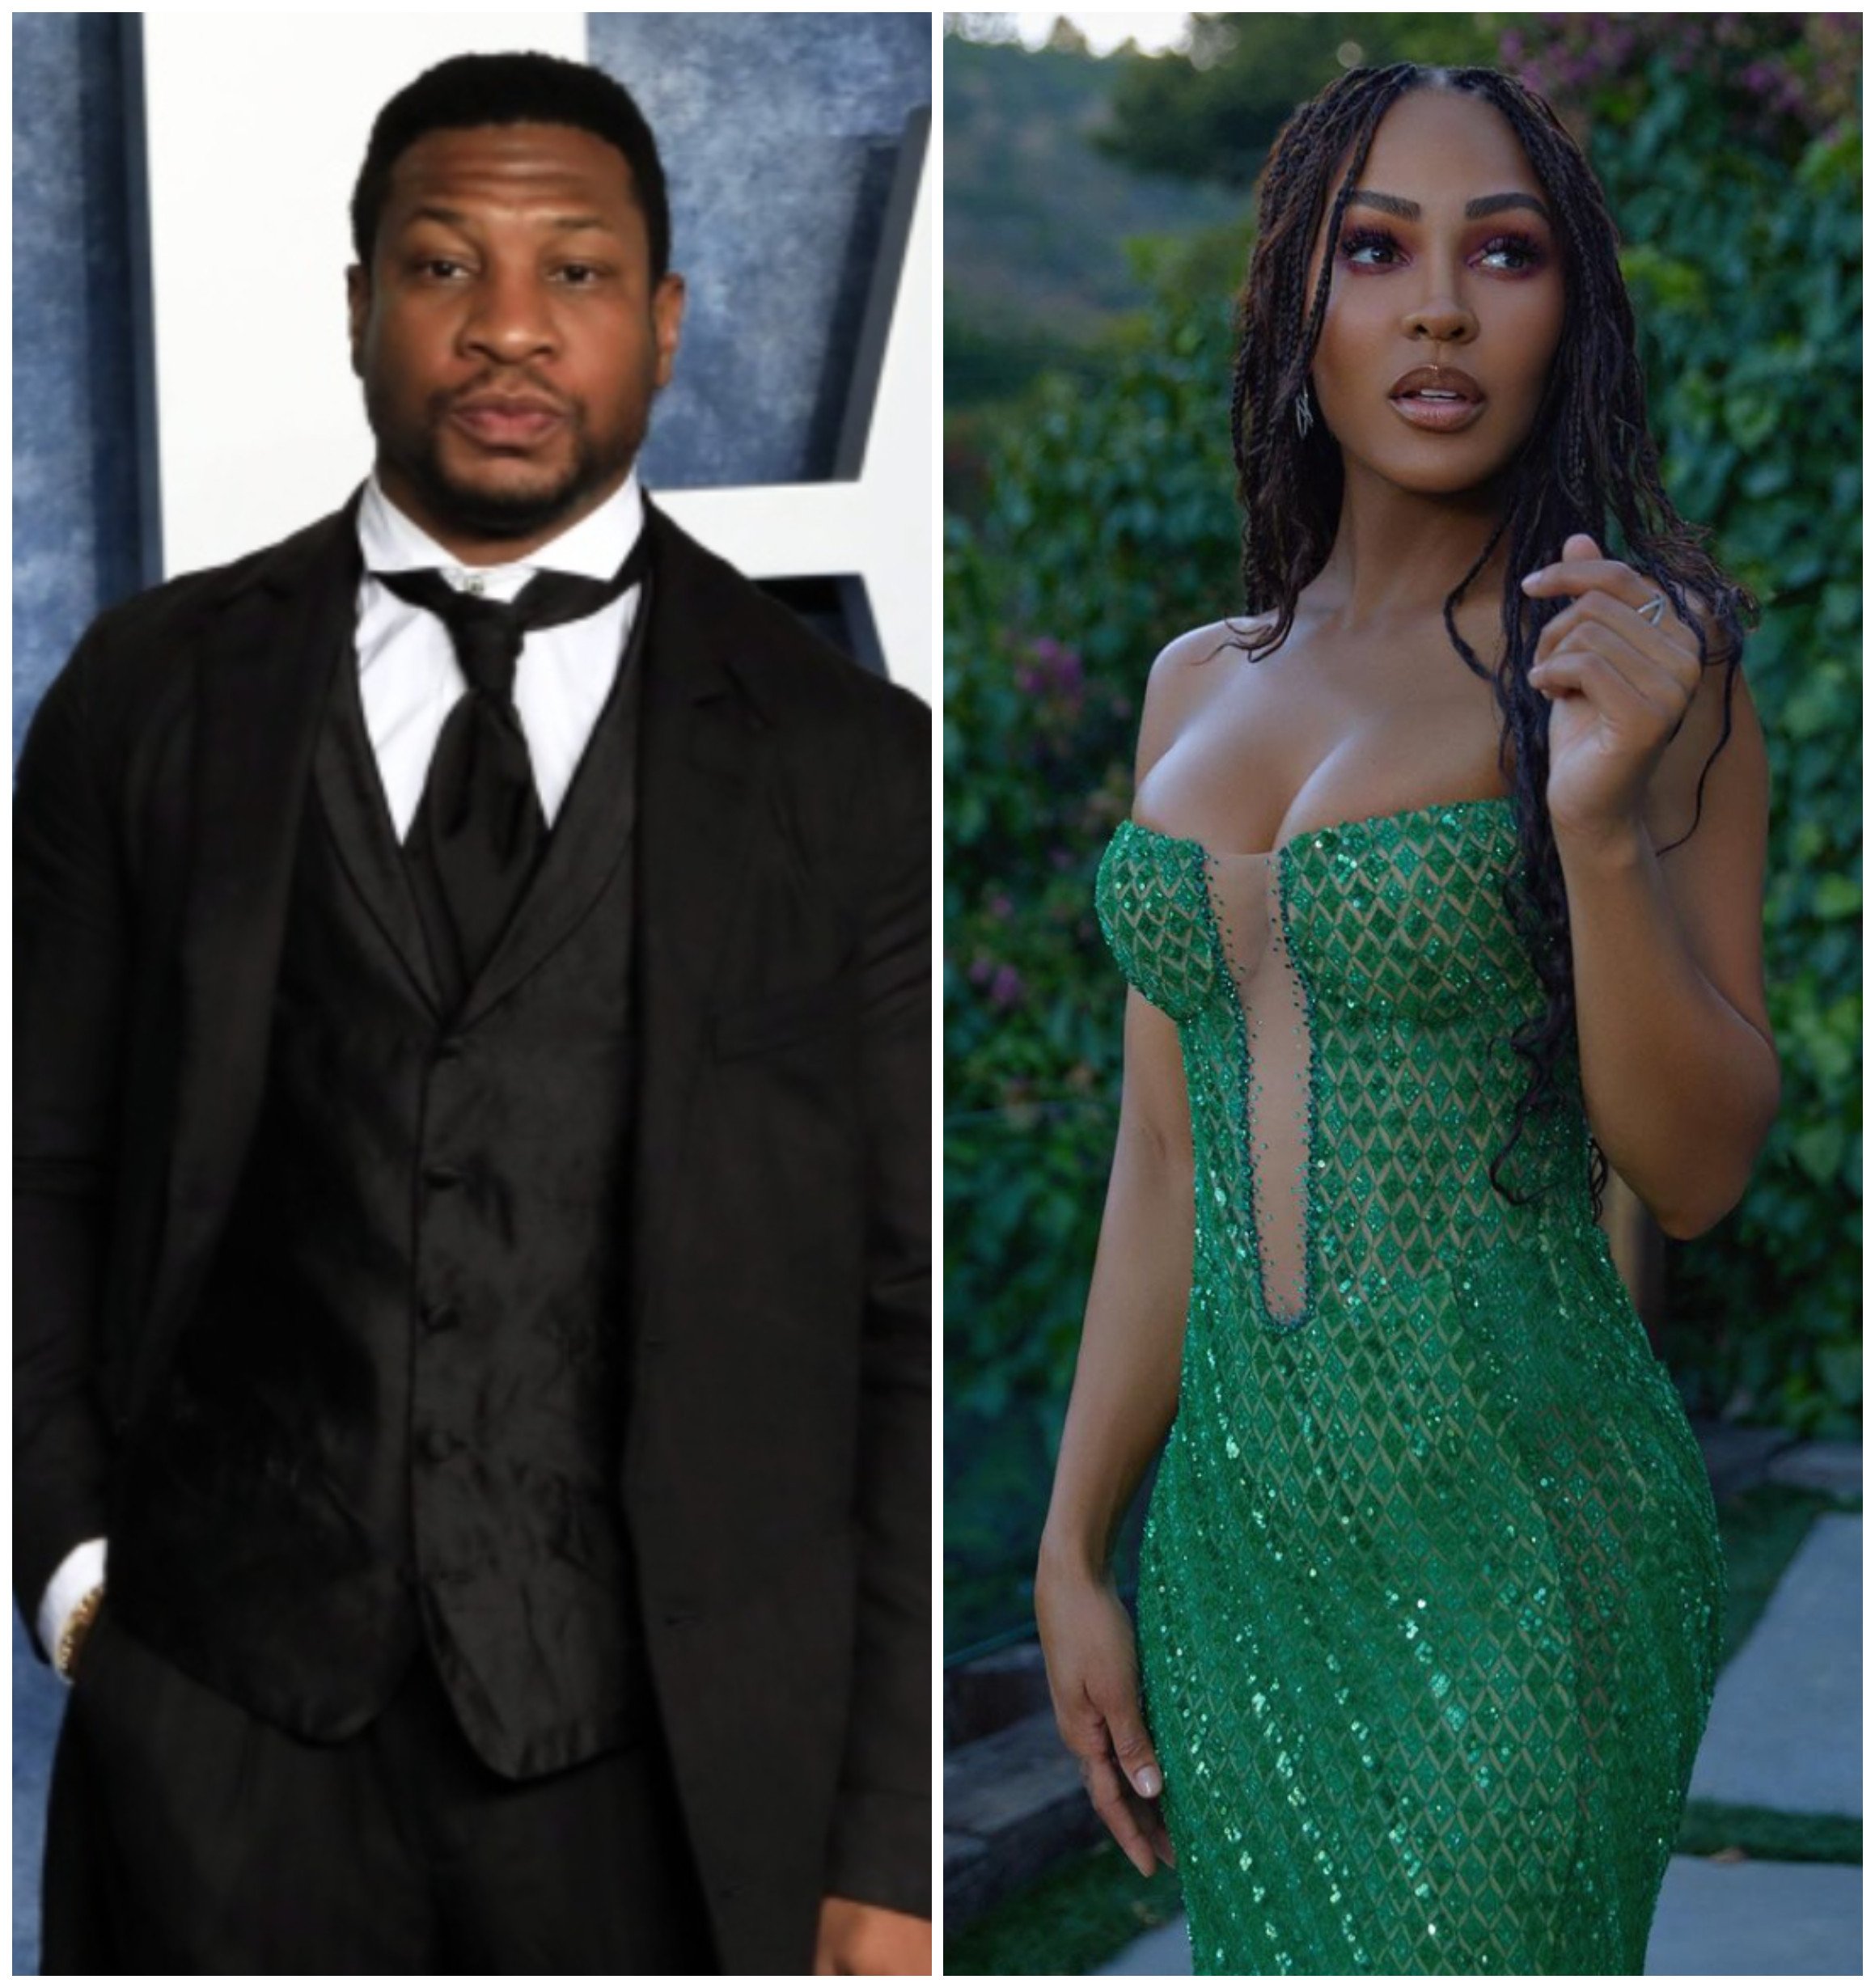 Former Marvel star Jonathan Majors is currently dating actress Meagan Good. Photos: EPA-EFE. @meagangood/Instagram